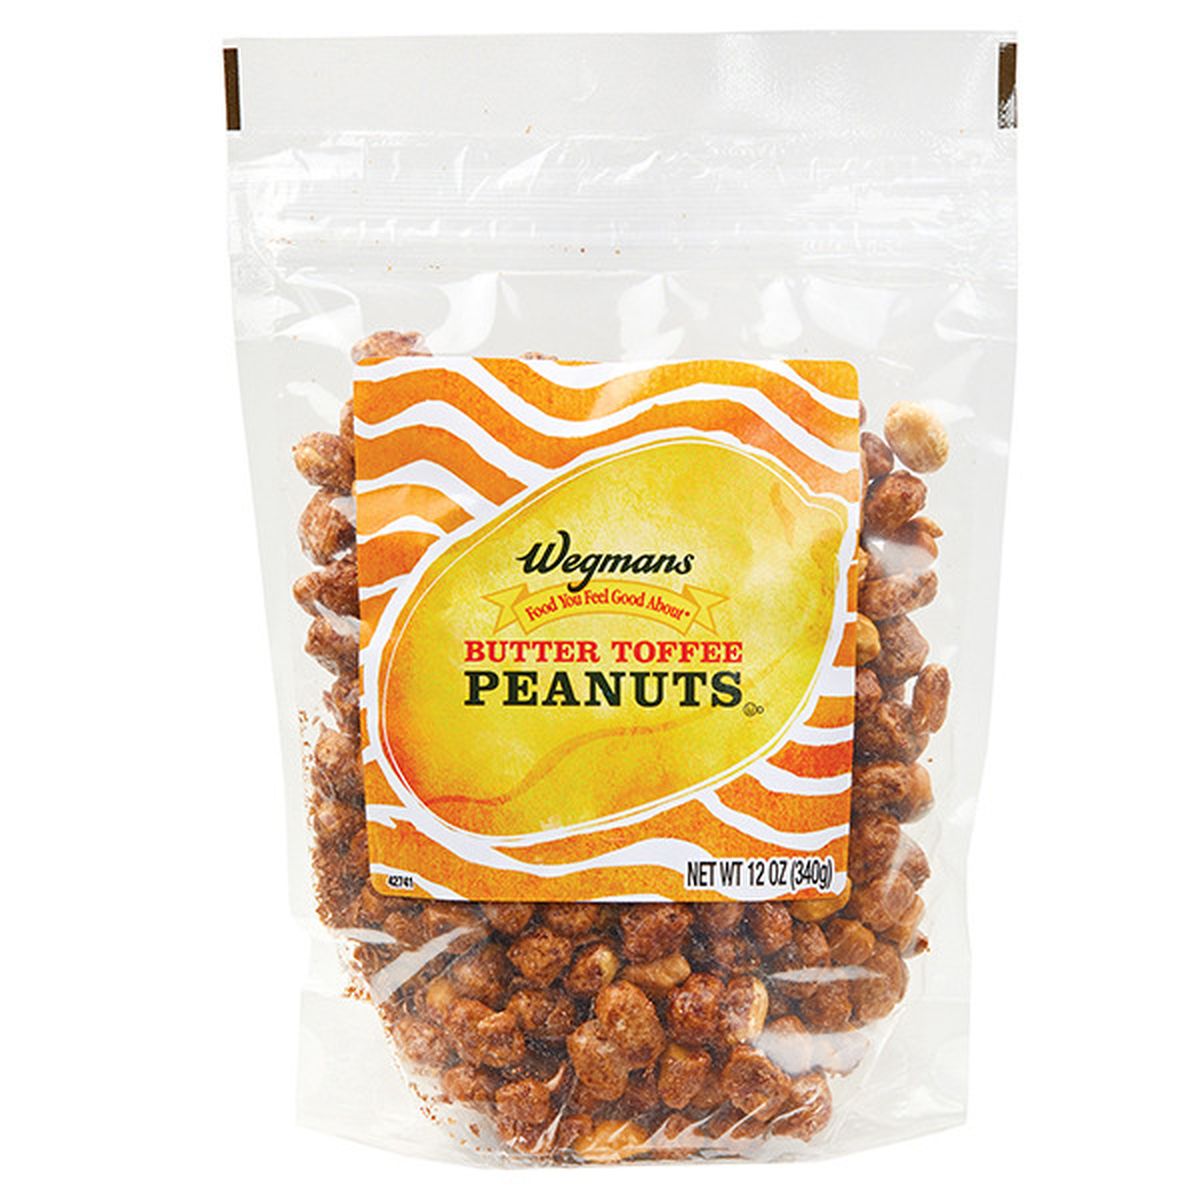 Calories in Wegmans Butter Toffee Peanuts